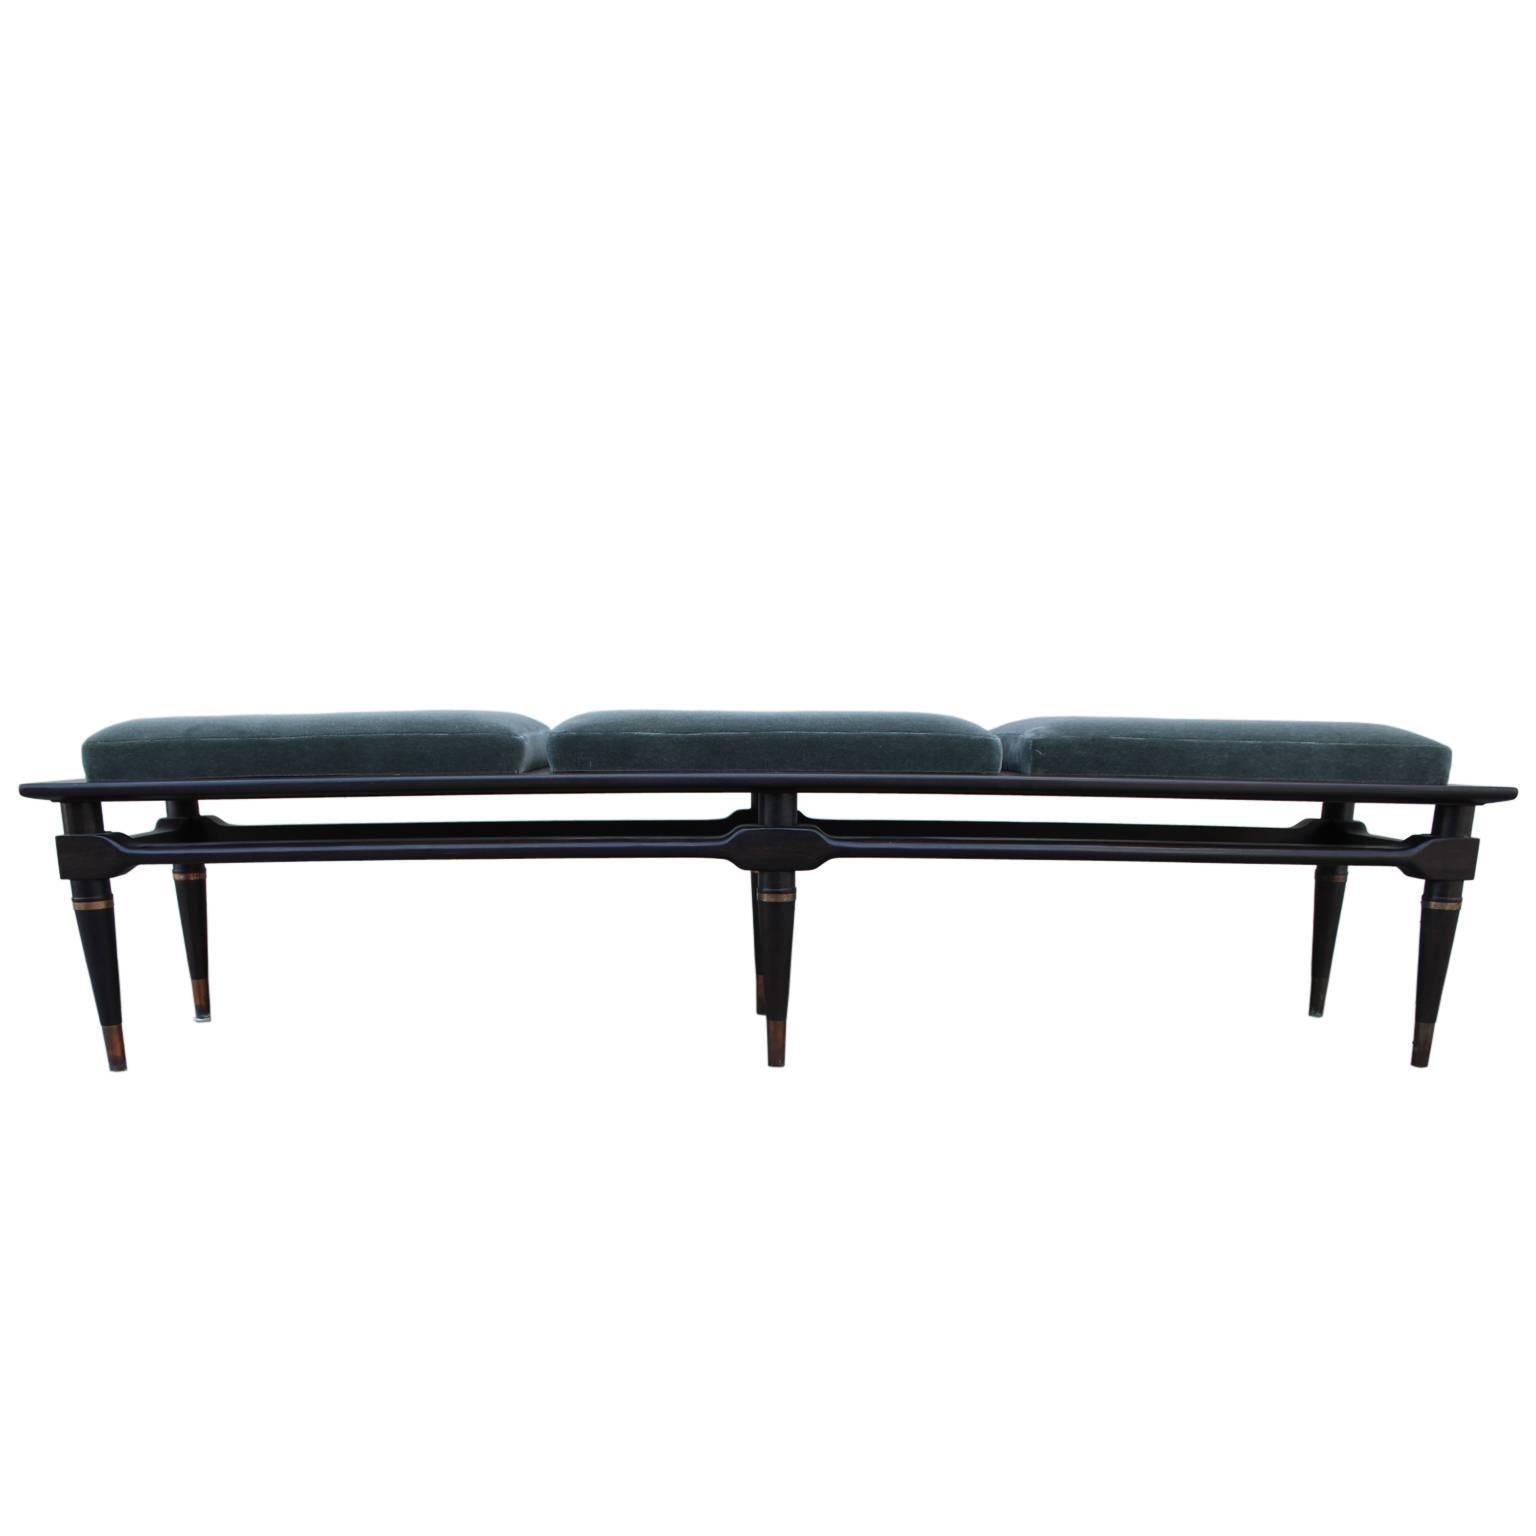 American Modern Ebony Mohair Three-Seat Bench with Brass Accents